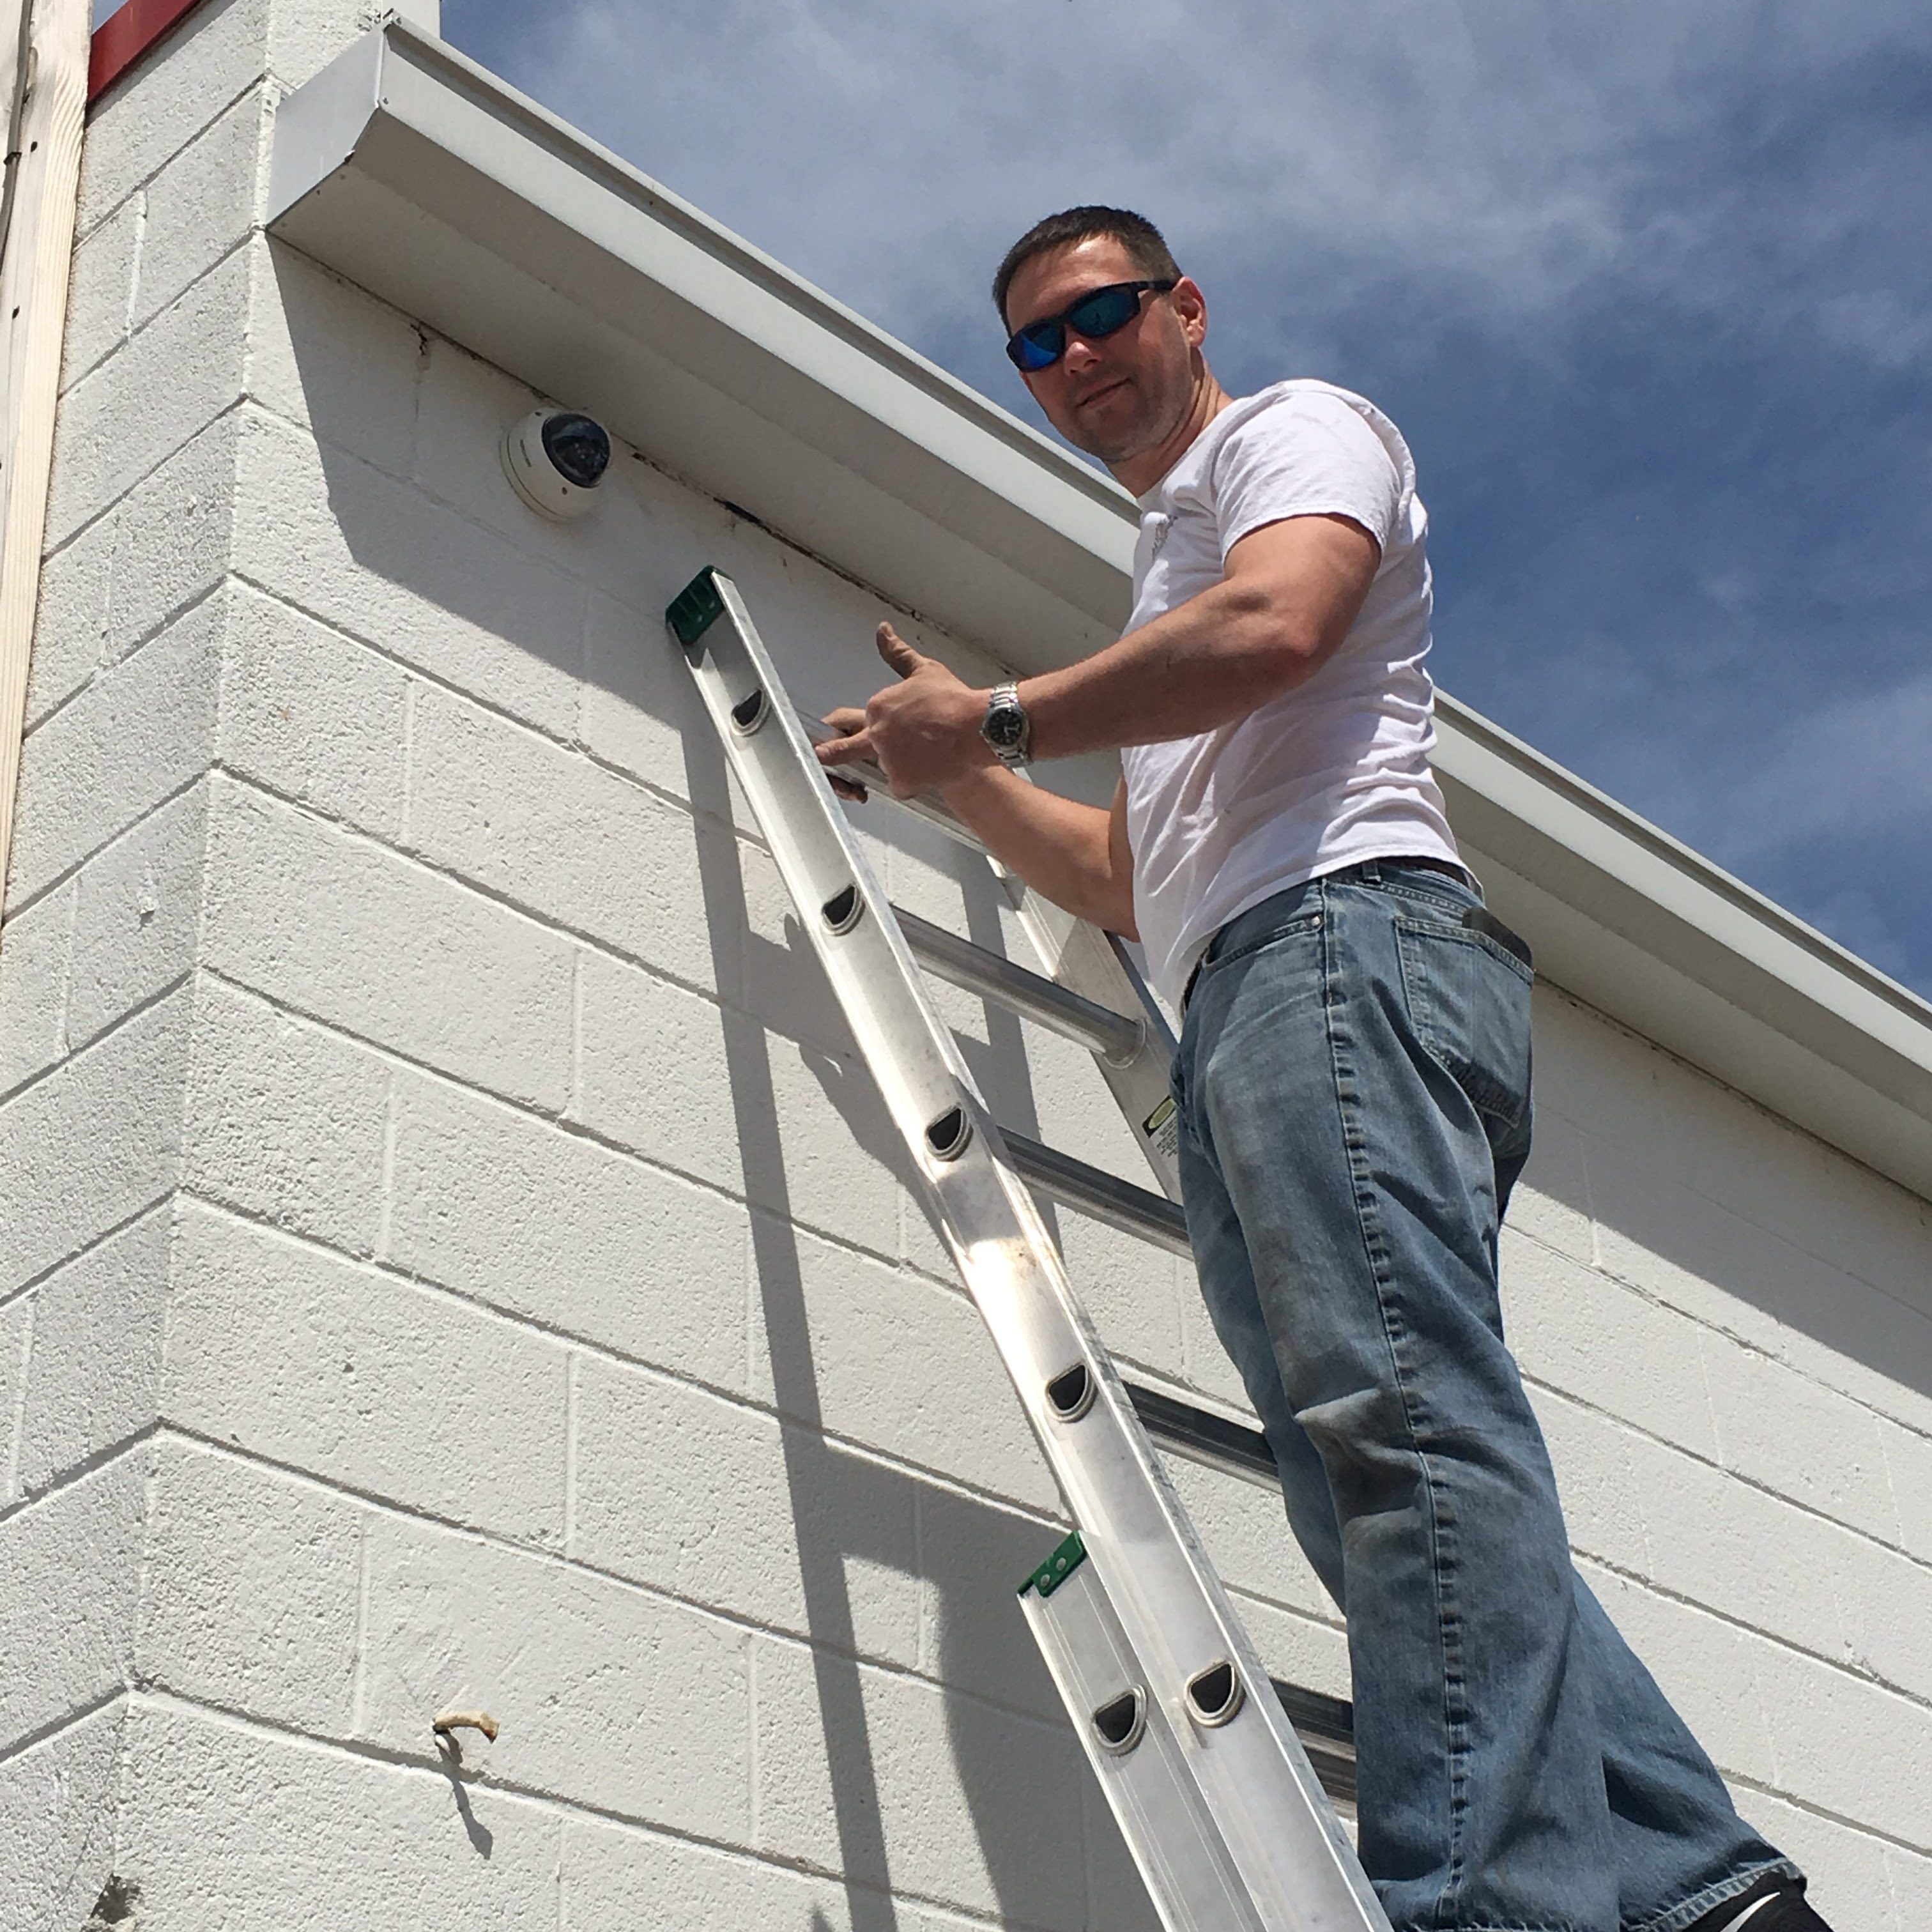 External cameras installed at Shorty's Automotive in Newport News